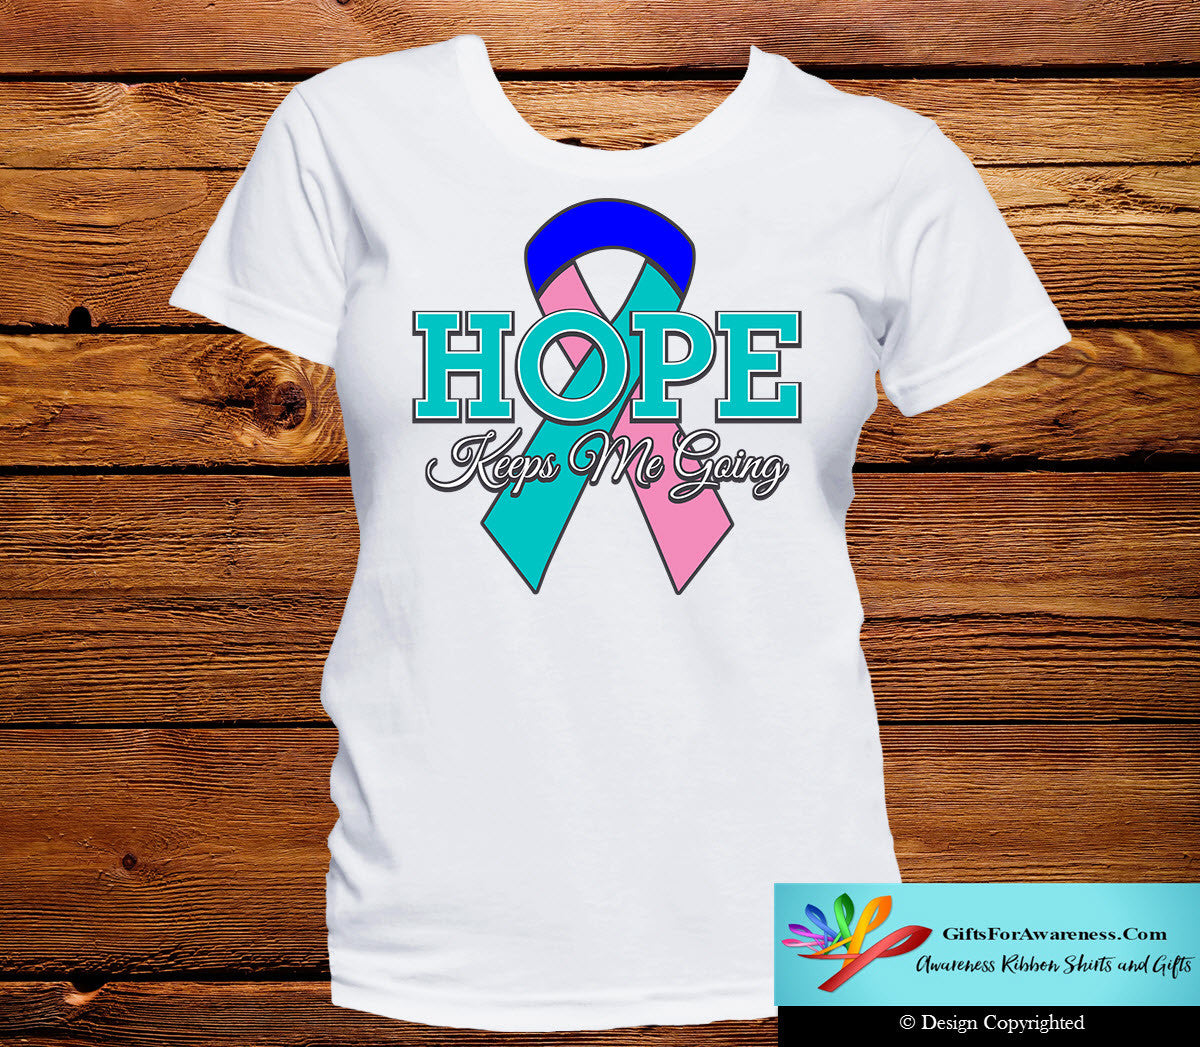 Thyroid Cancer Hope Keeps Me Going Shirts - GiftsForAwareness